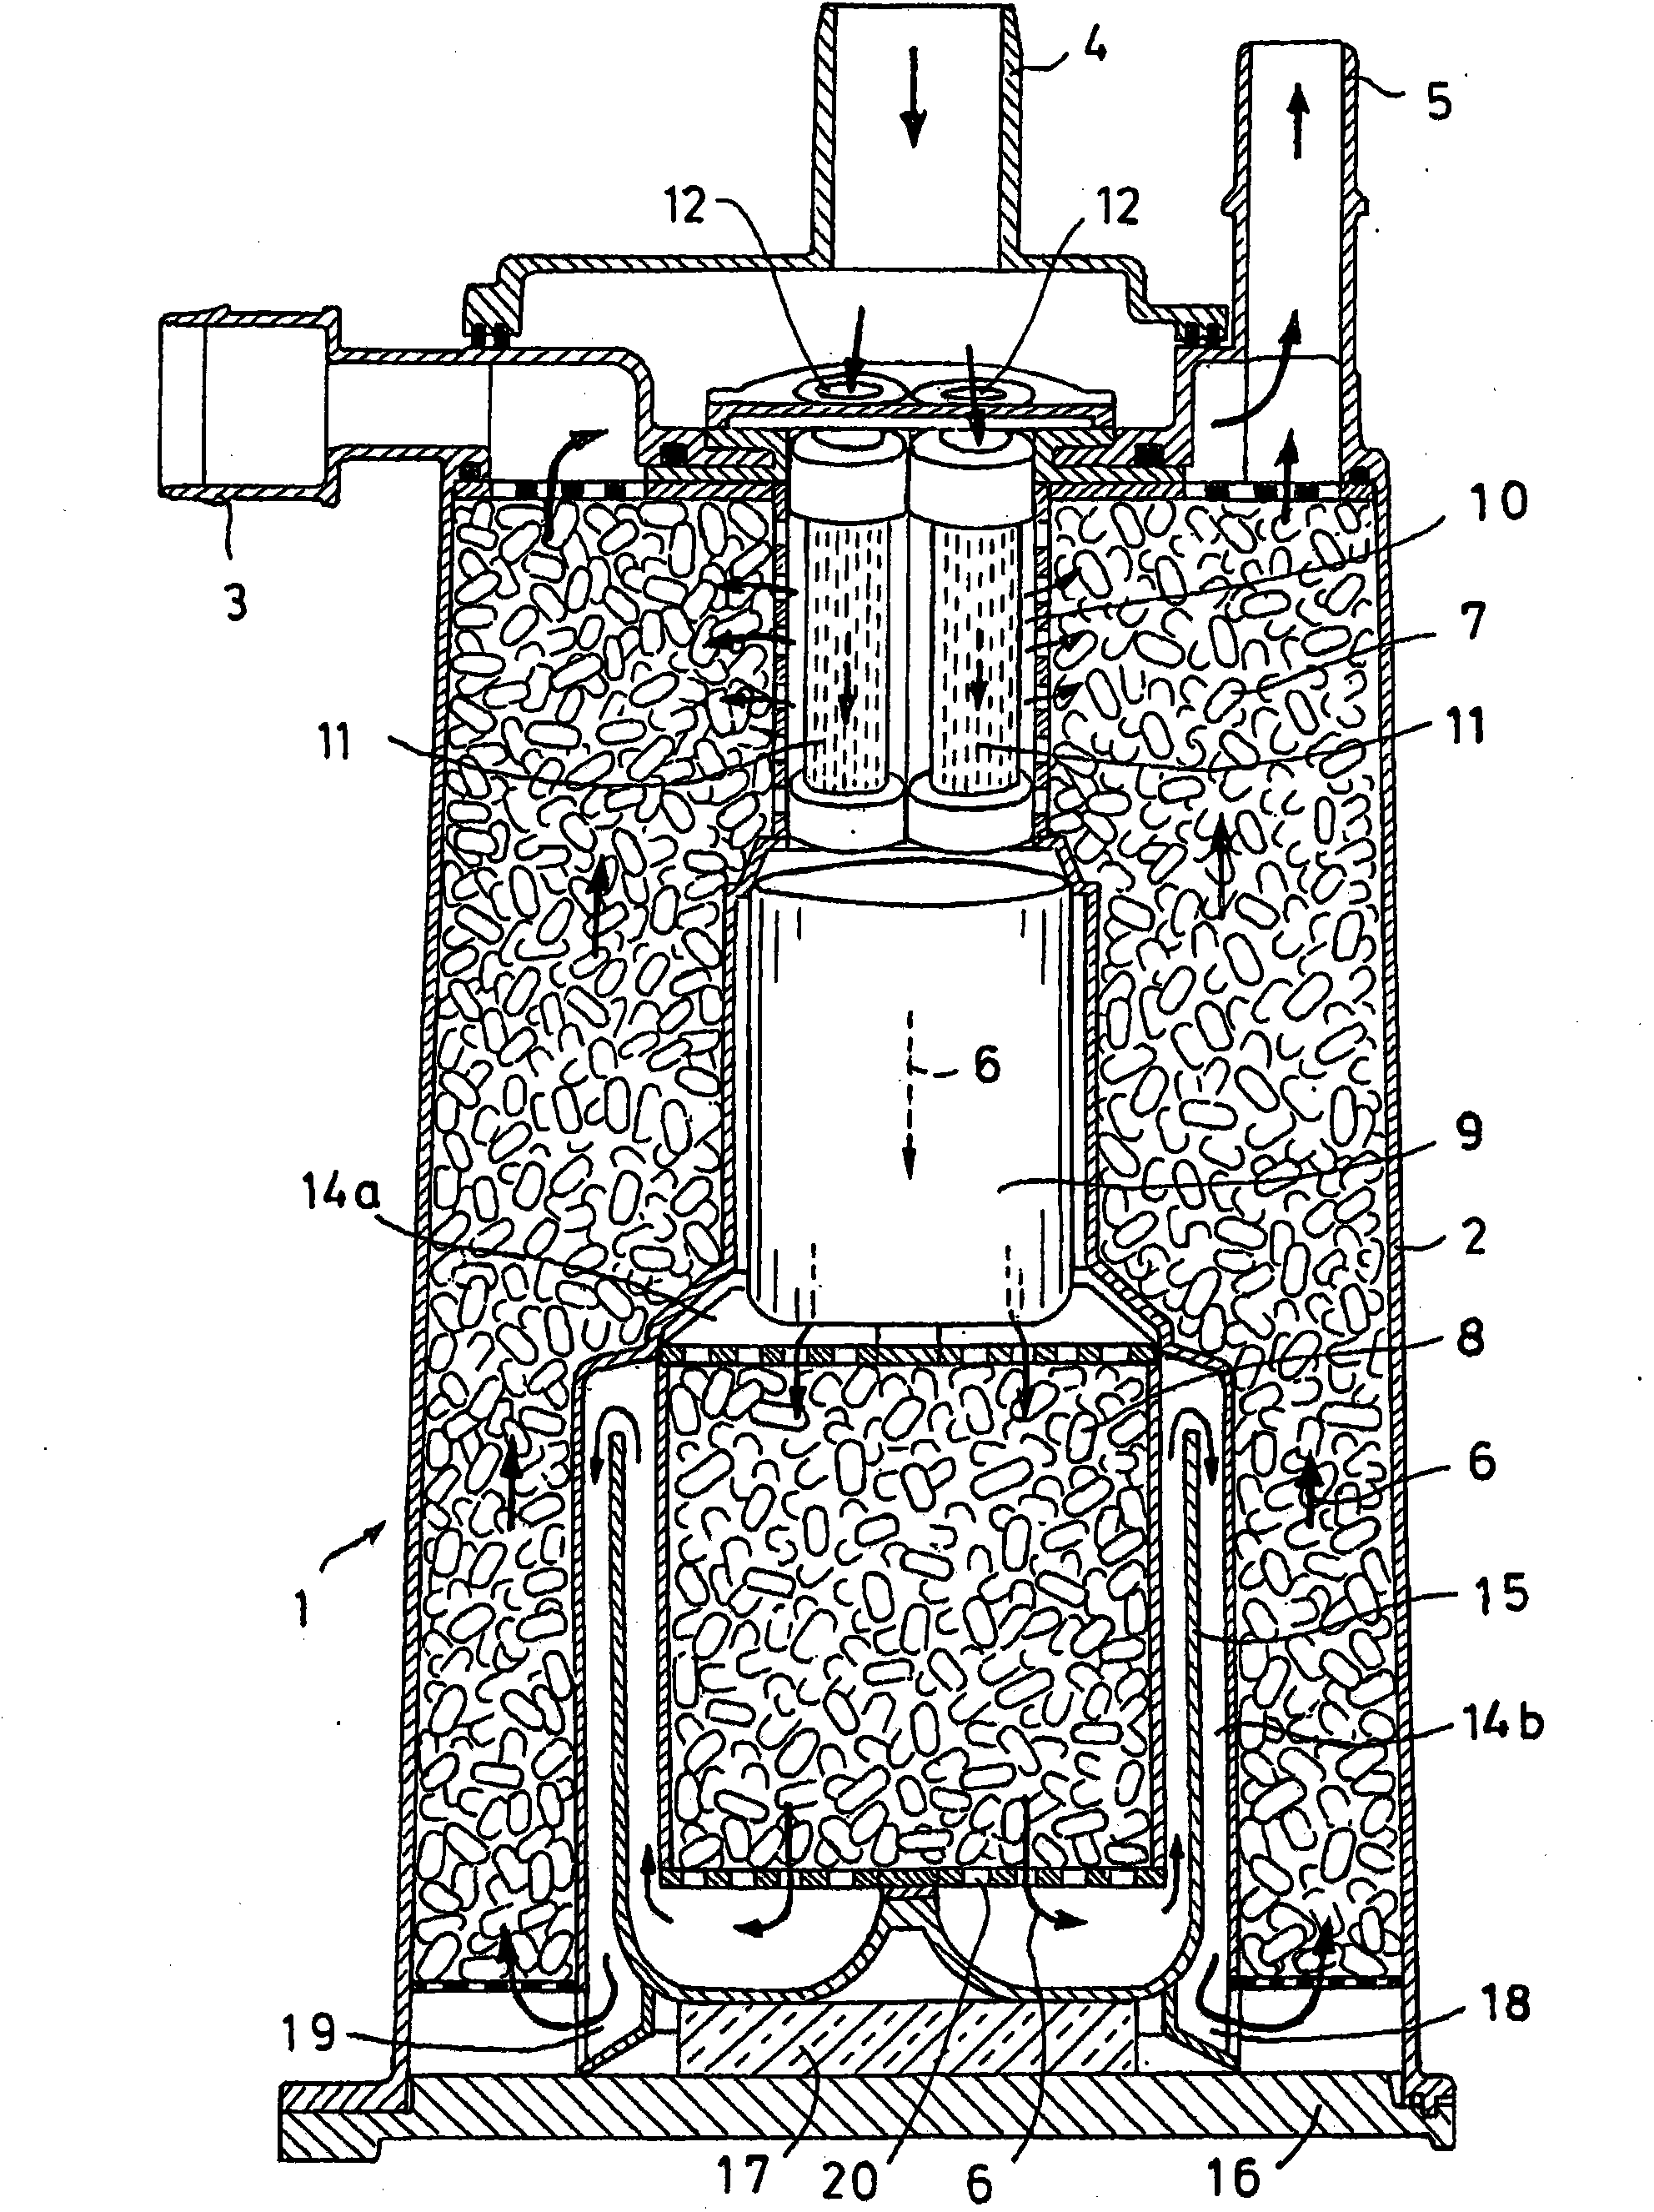 Fuel vapor storage and recovery apparatus